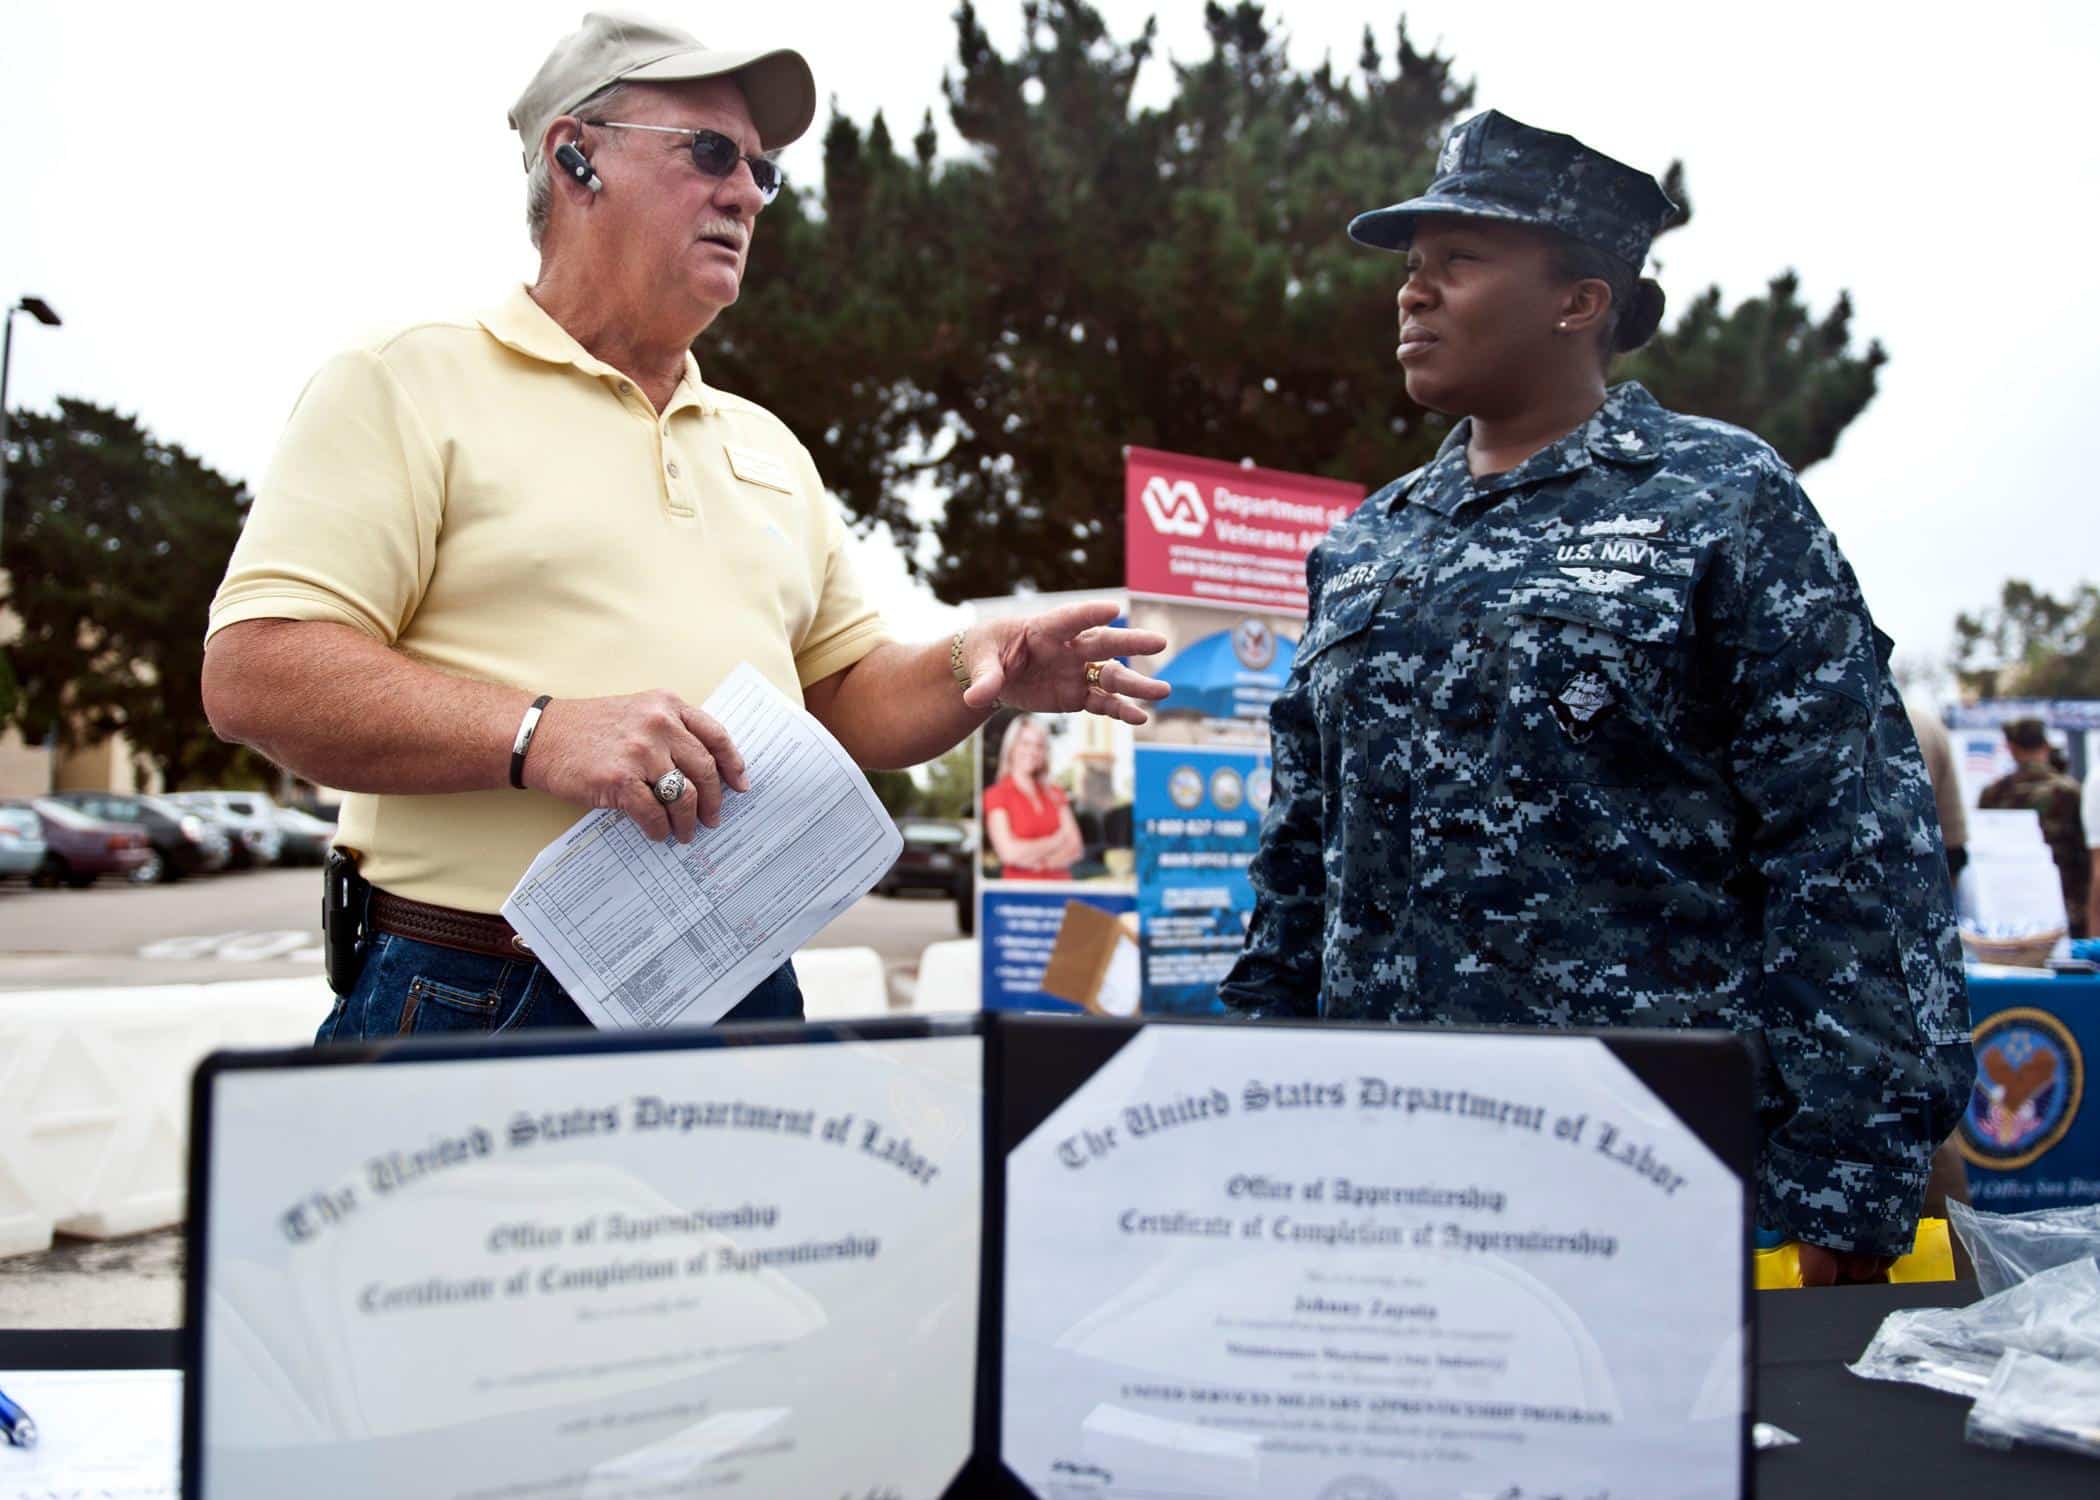 Kenneth Ledbetter, marketing outreach coordinator of the United States Military Apprenticeship Program, discusses certification programs with a sailor during the annual education fair at Naval Air Station North Island. The educational fair hosted more than 75 colleges and universities and provided sailors an opportunity to learn about various degree programs offered by each school and certifications that can be earned through USMAP and Navy COOL.